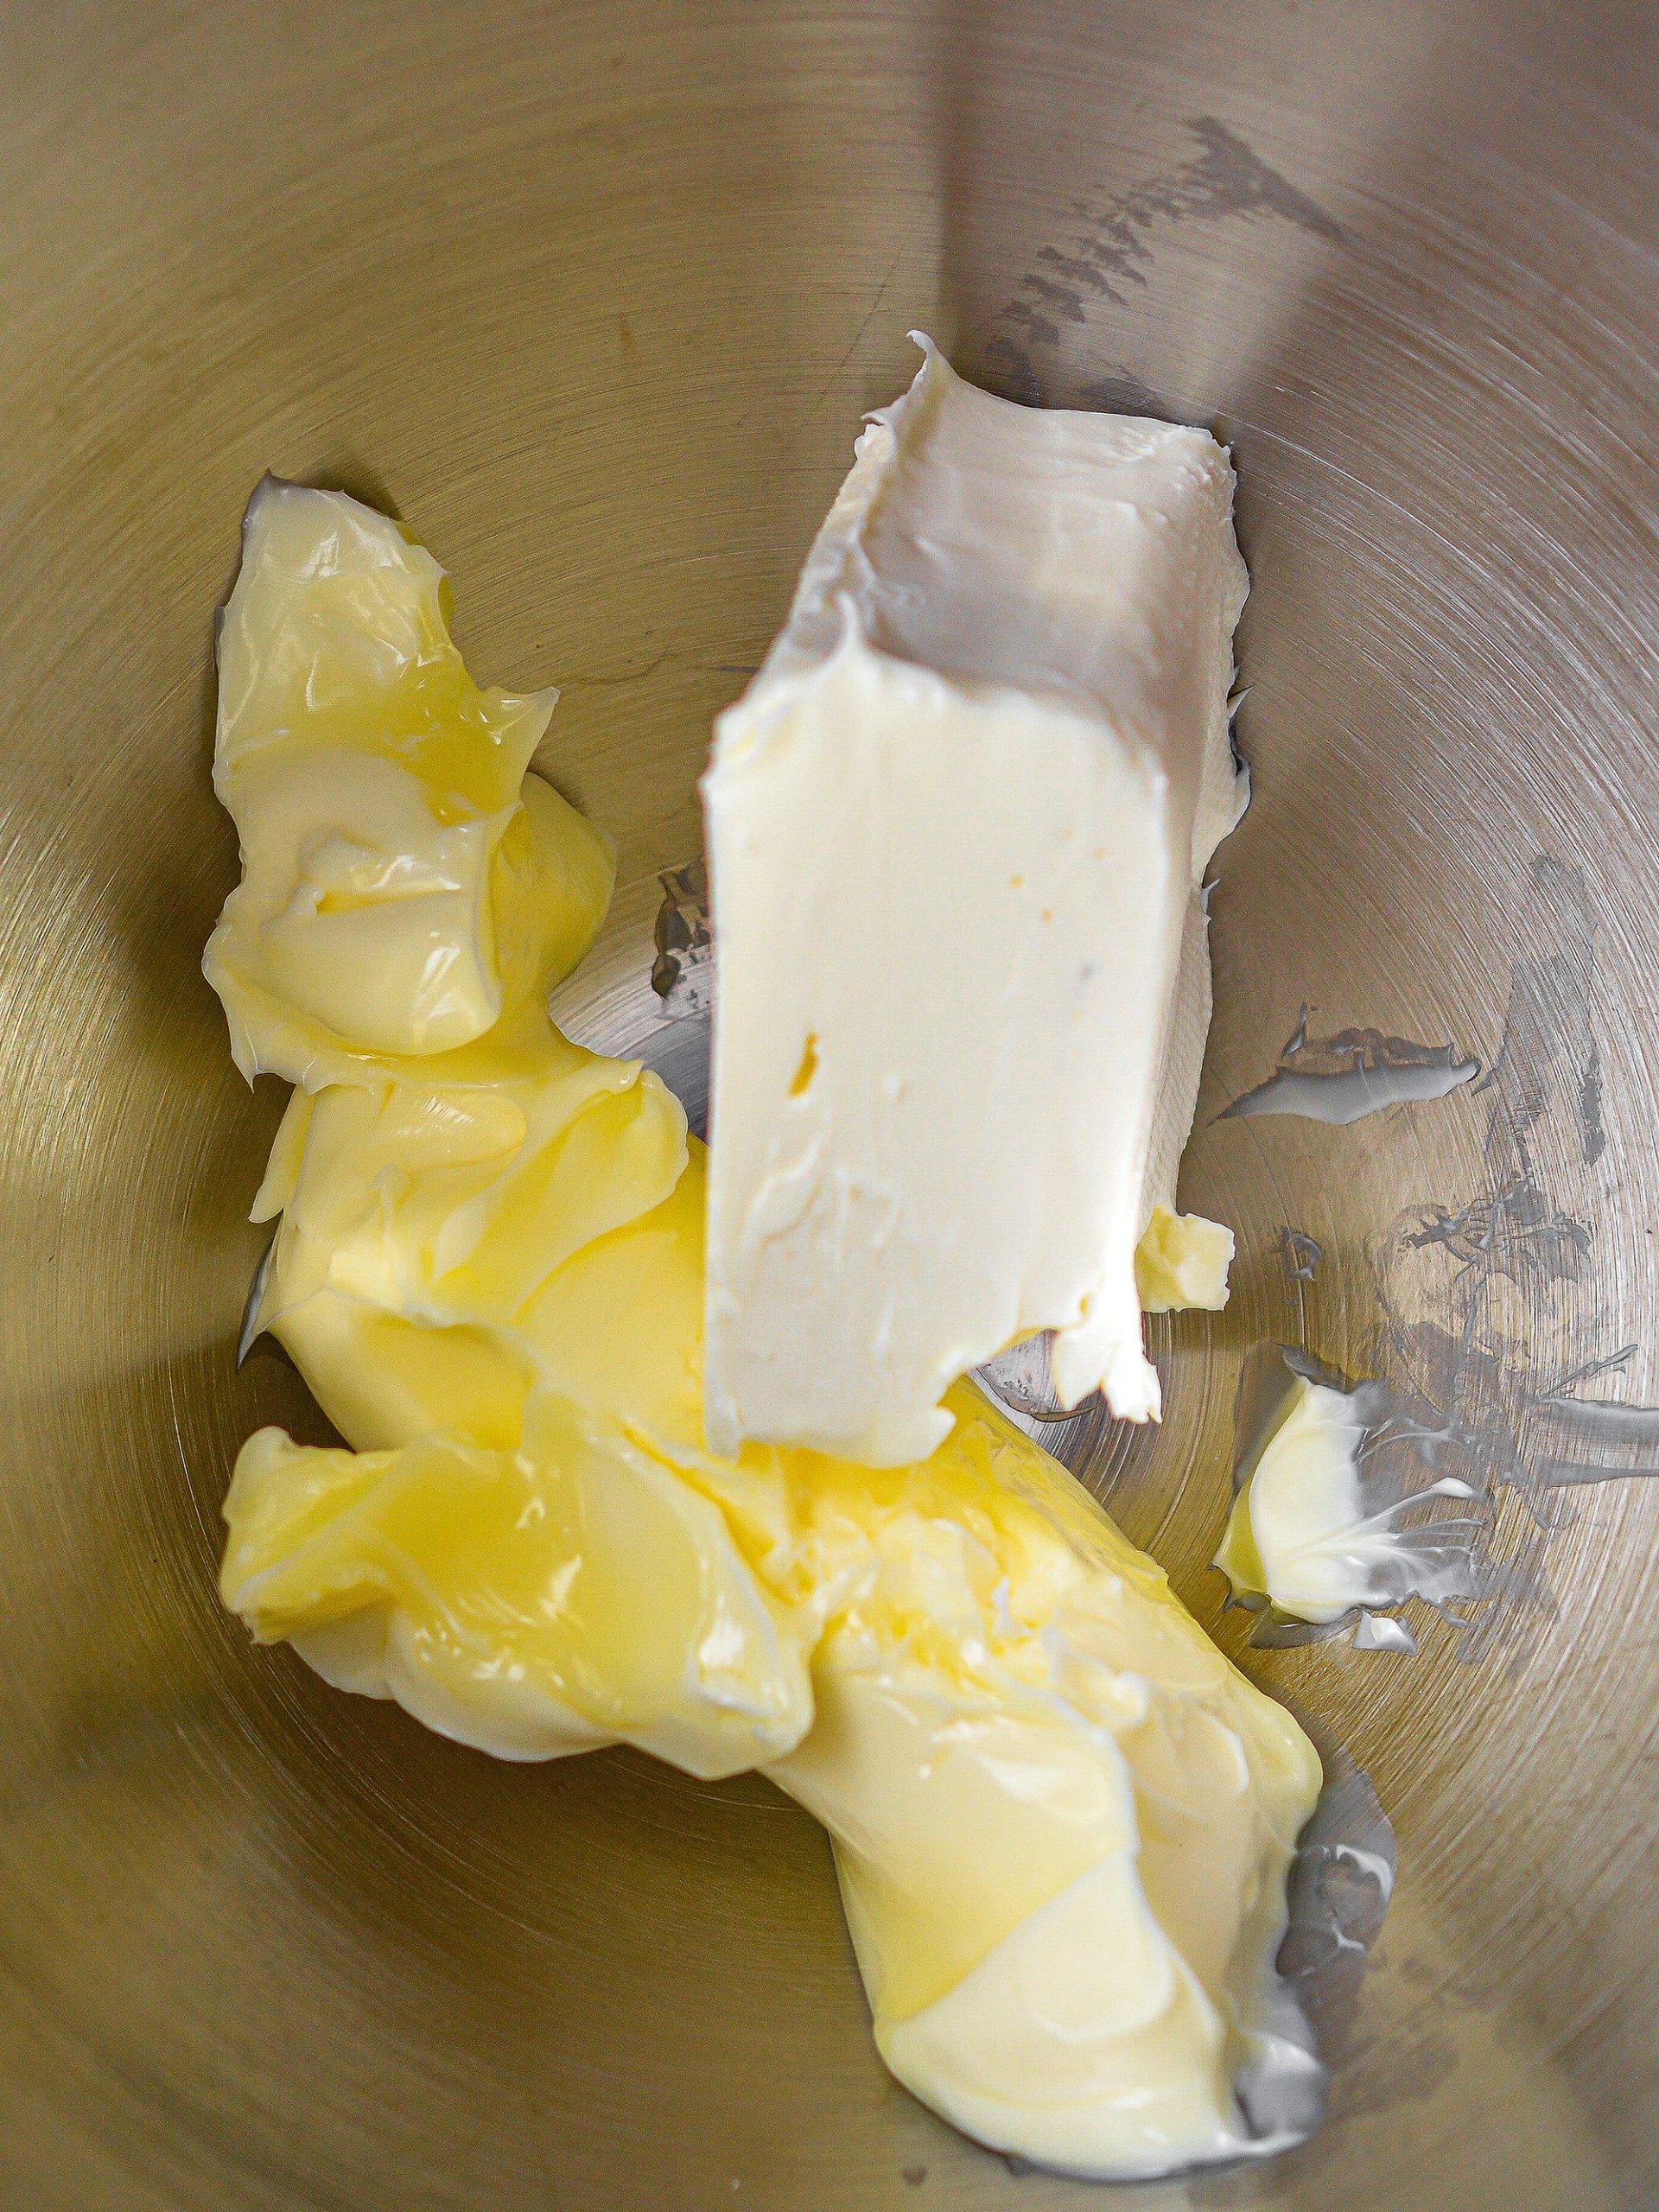 Place 4 oz cream cheese and 1 stick of butter in a mixing bowl and beat until creamy.